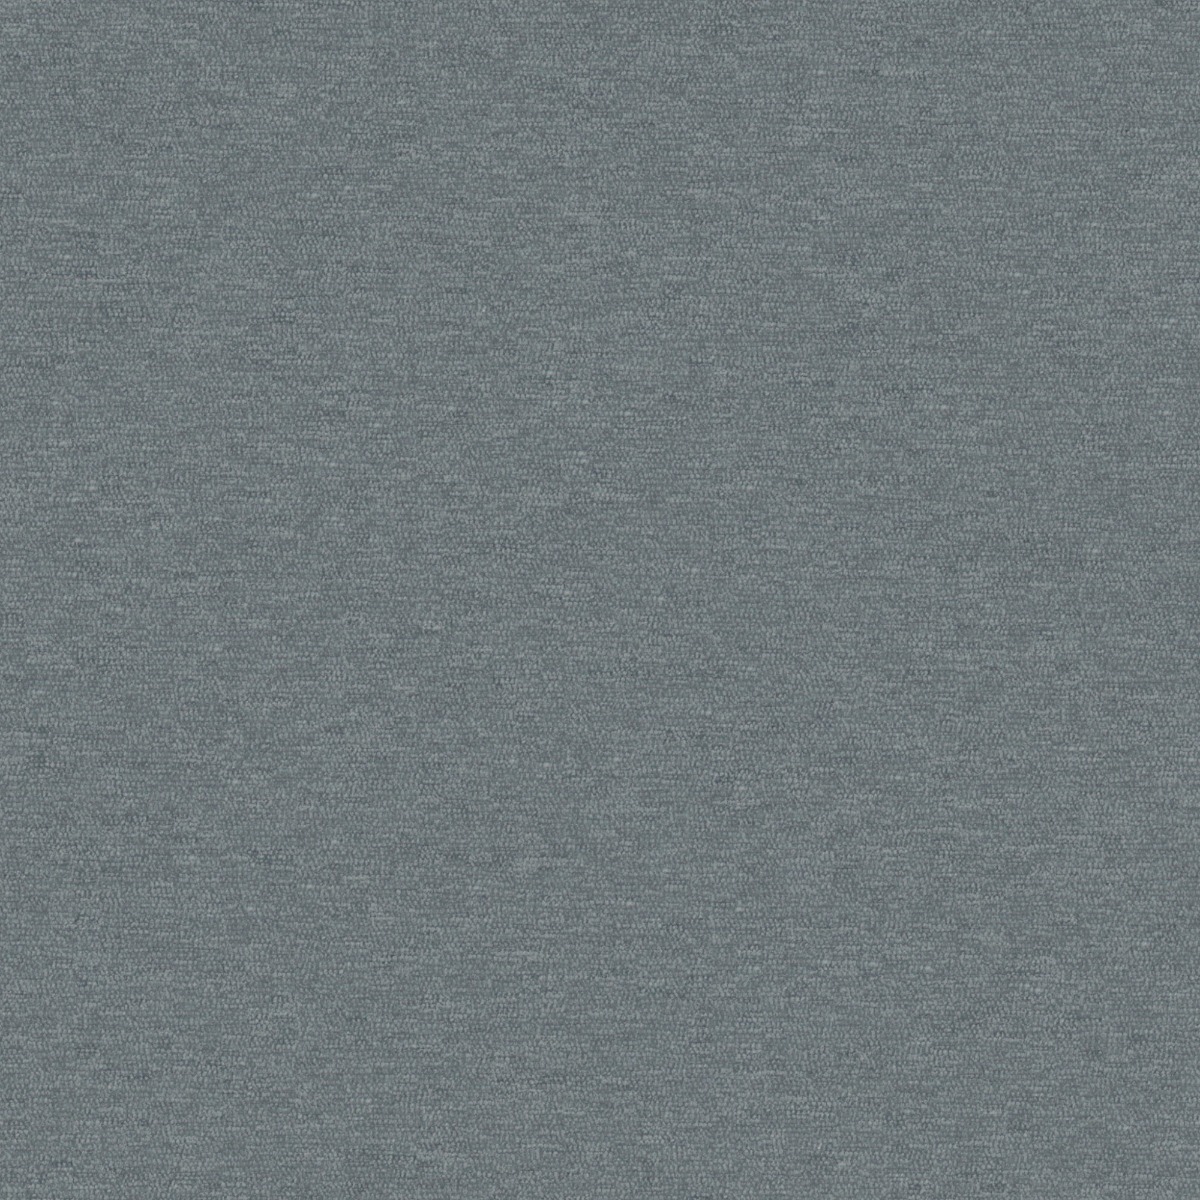 A seamless fabric texture with plain duckegg chenille units arranged in a None pattern